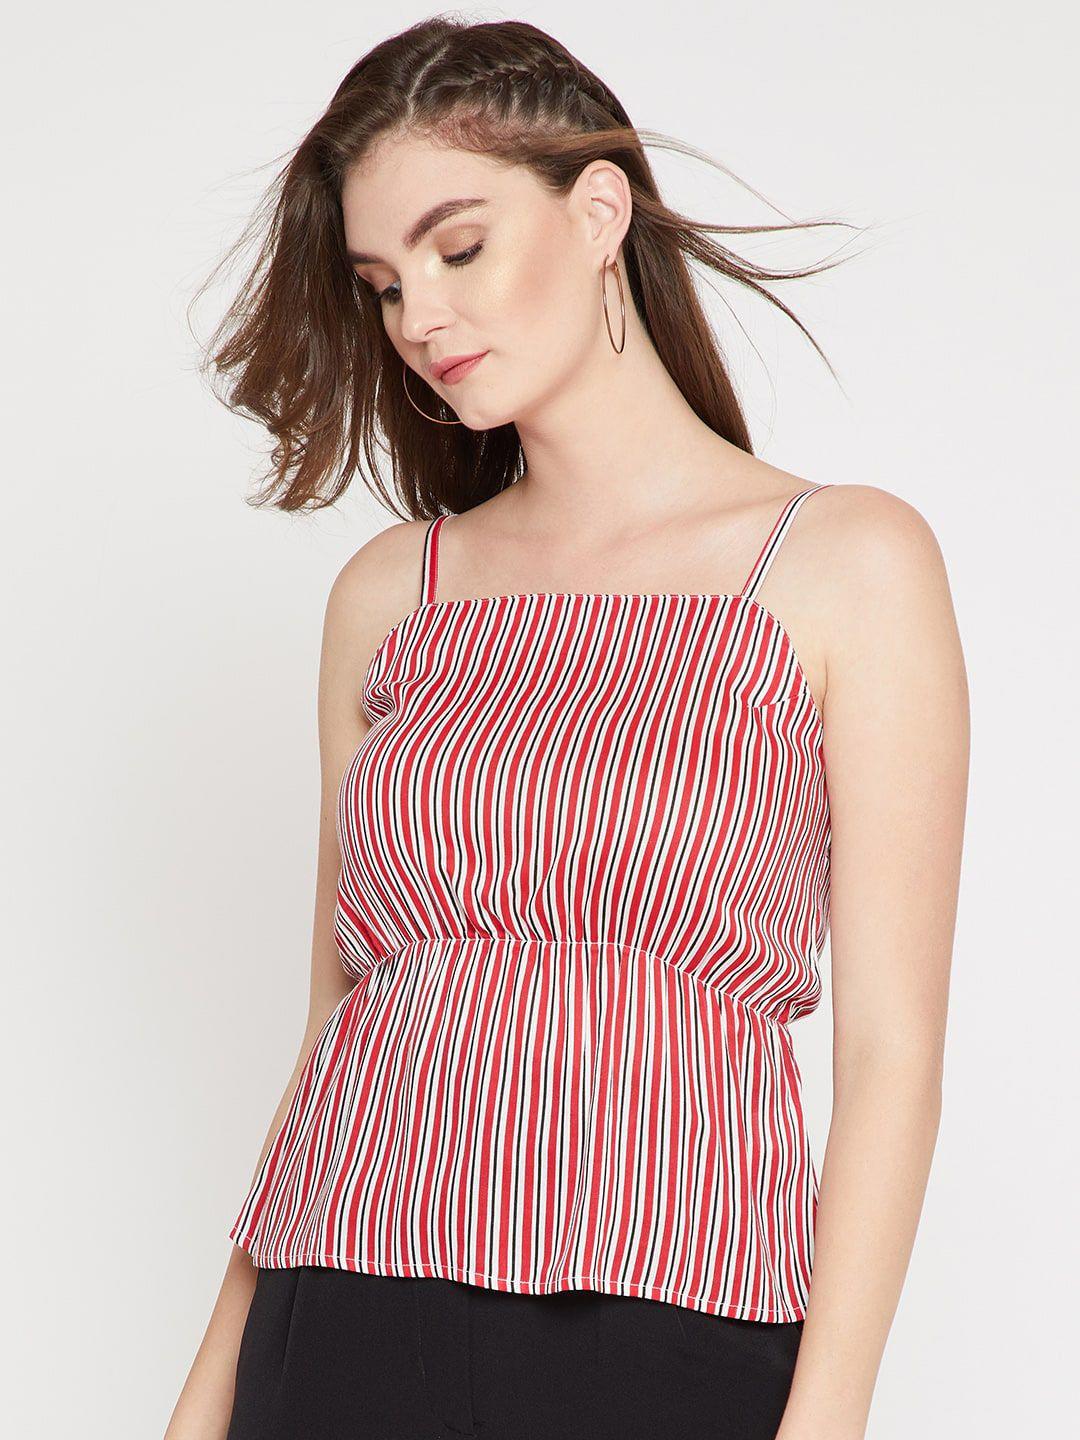 marie claire red & white striped shoulder straps cinched waist top